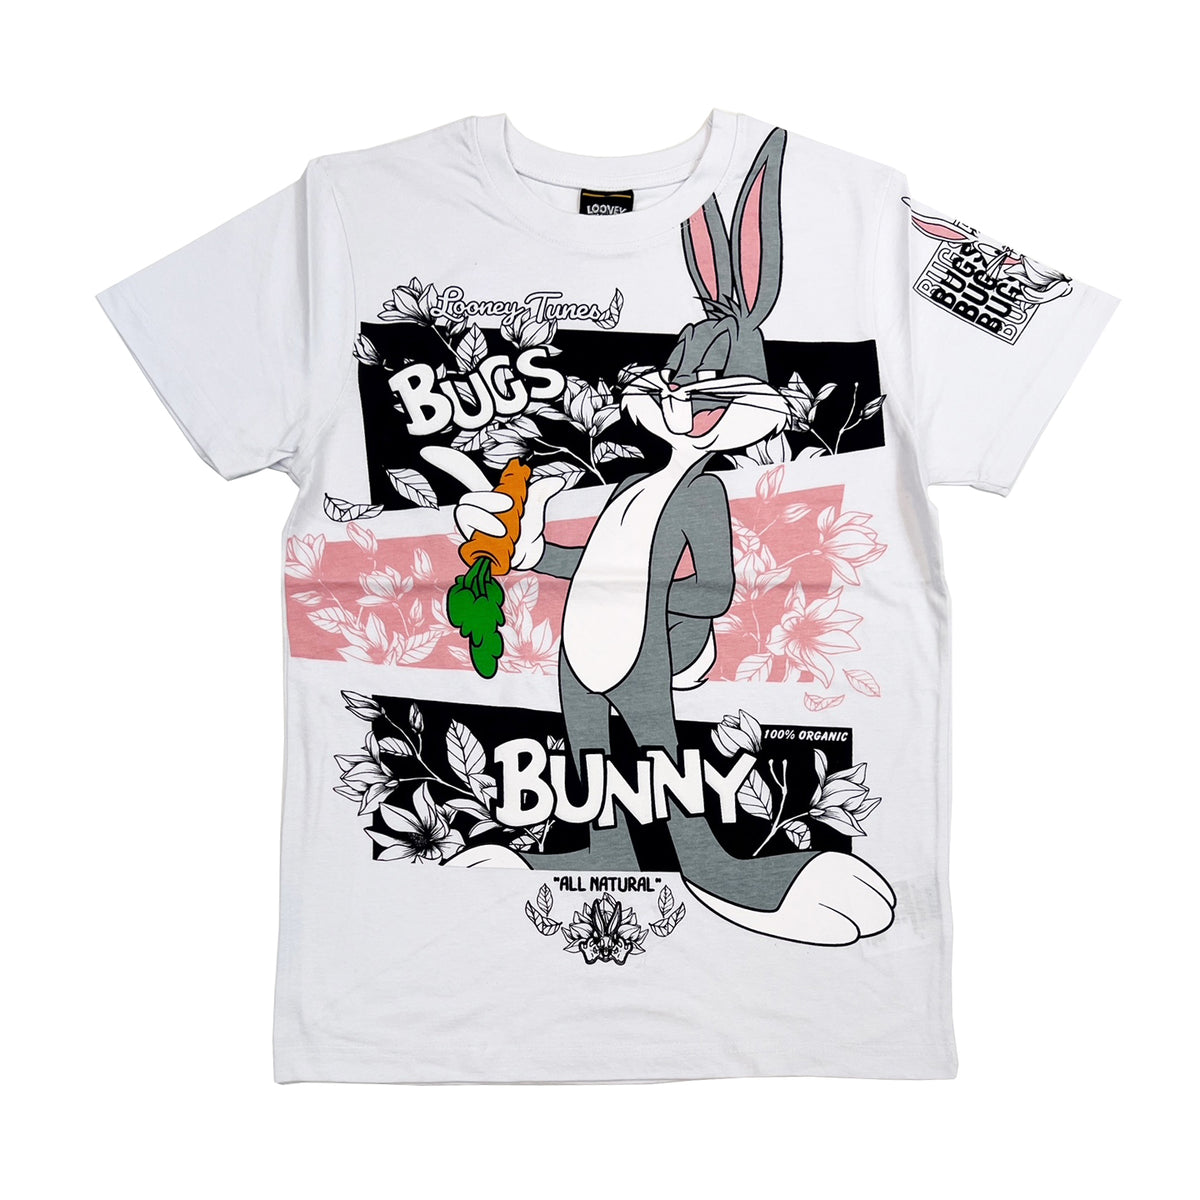 Looney Bunny $30 Tunes (White) Bugs 2 for / $16.99 Tee